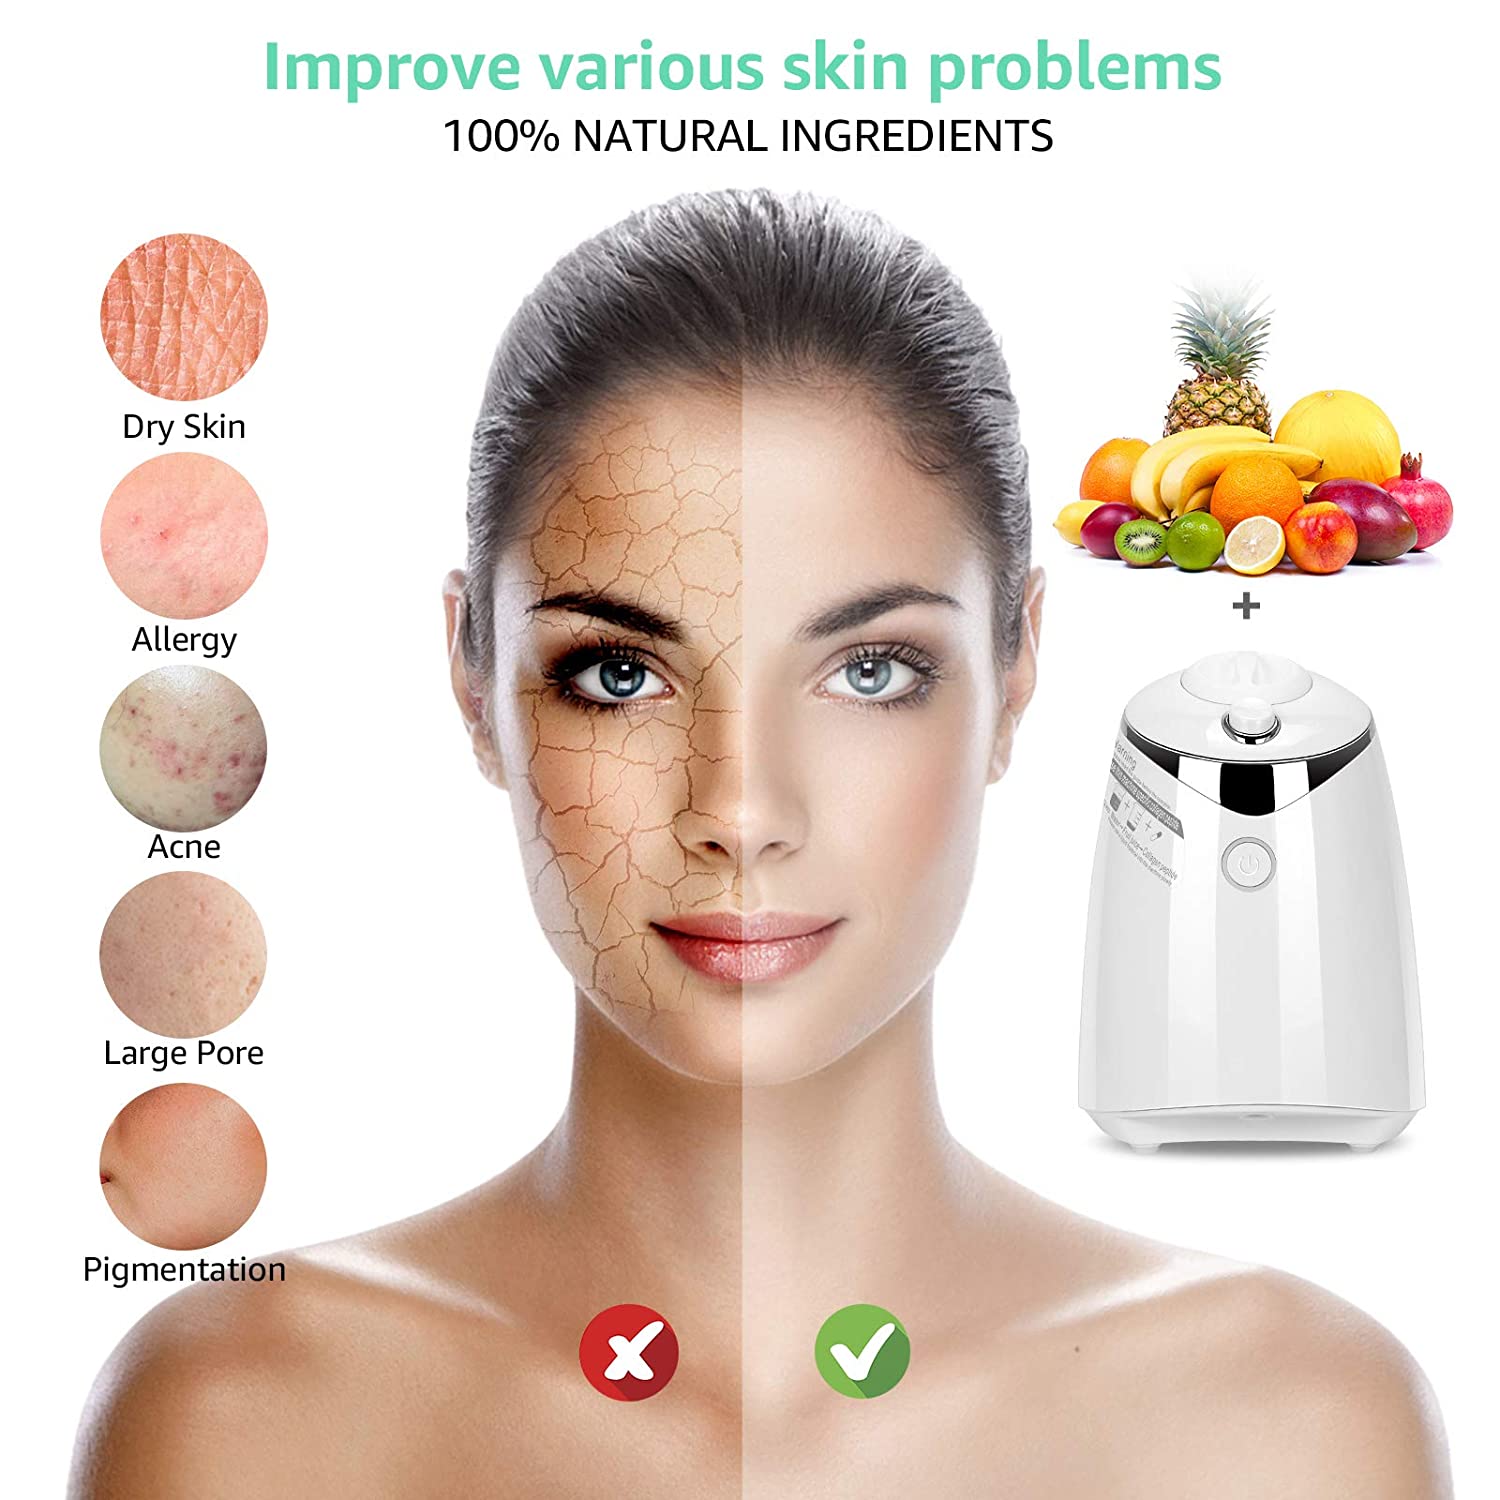 IFINE beauty Hot Selling Products Beauty Spa Skin Treatment Face Mask Making Machine With 32 pieces Collagen peptides